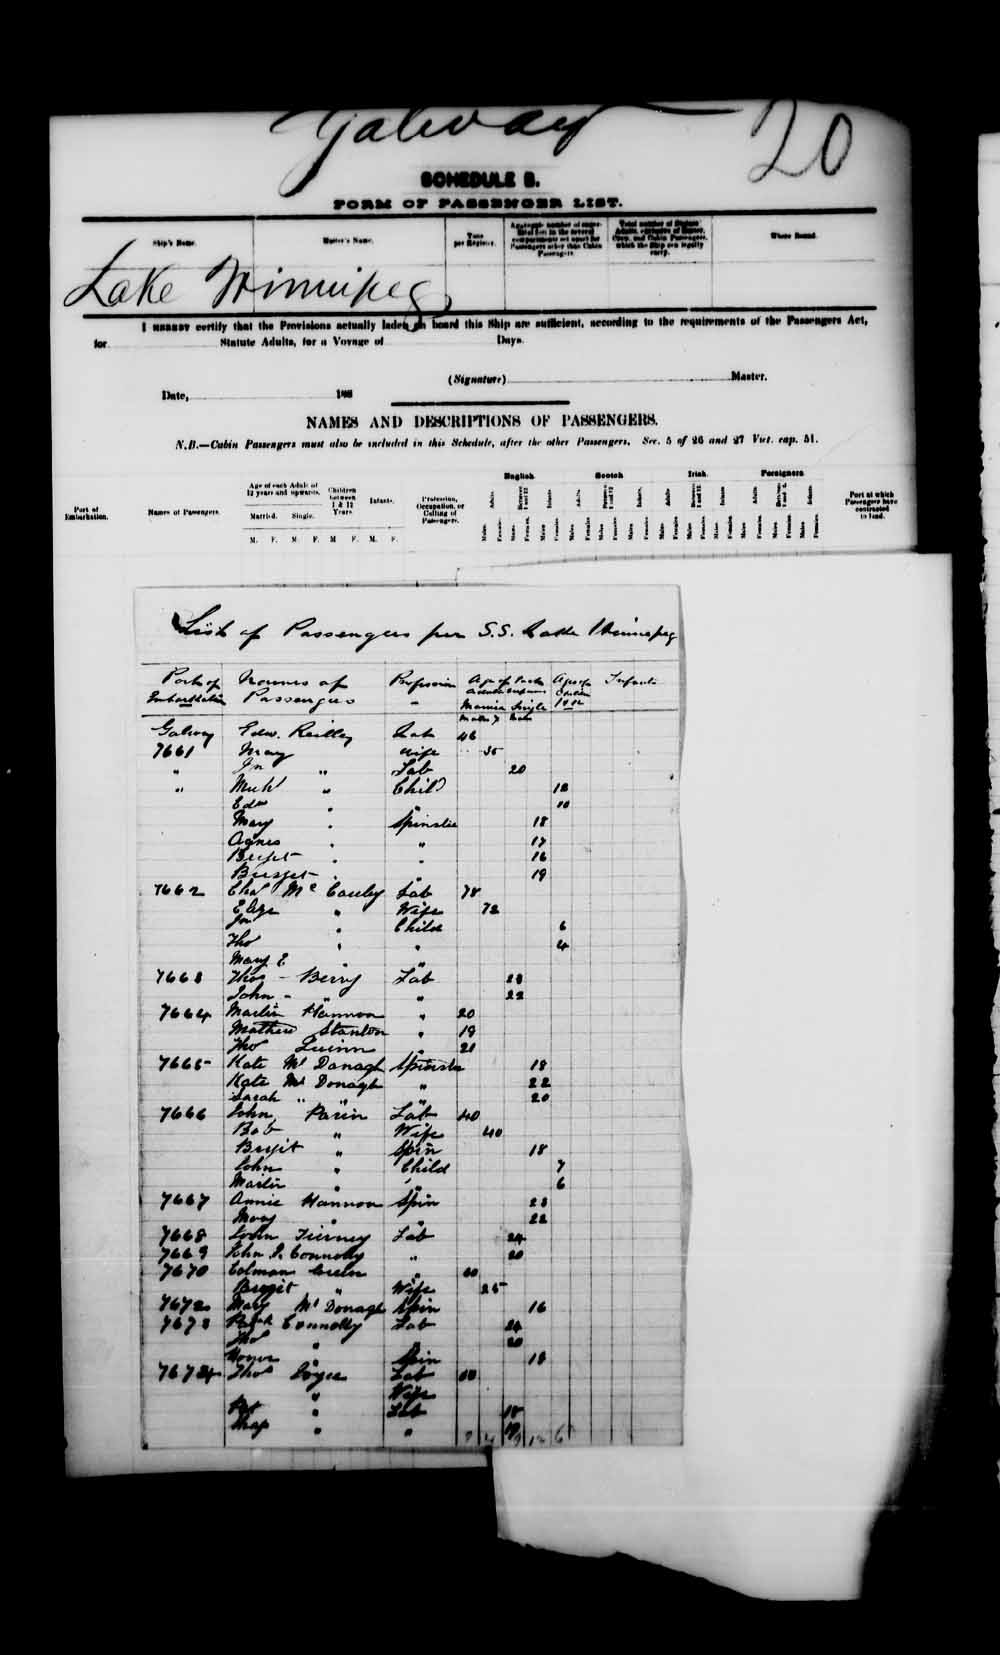 Digitized page of Passenger Lists for Image No.: e003541622